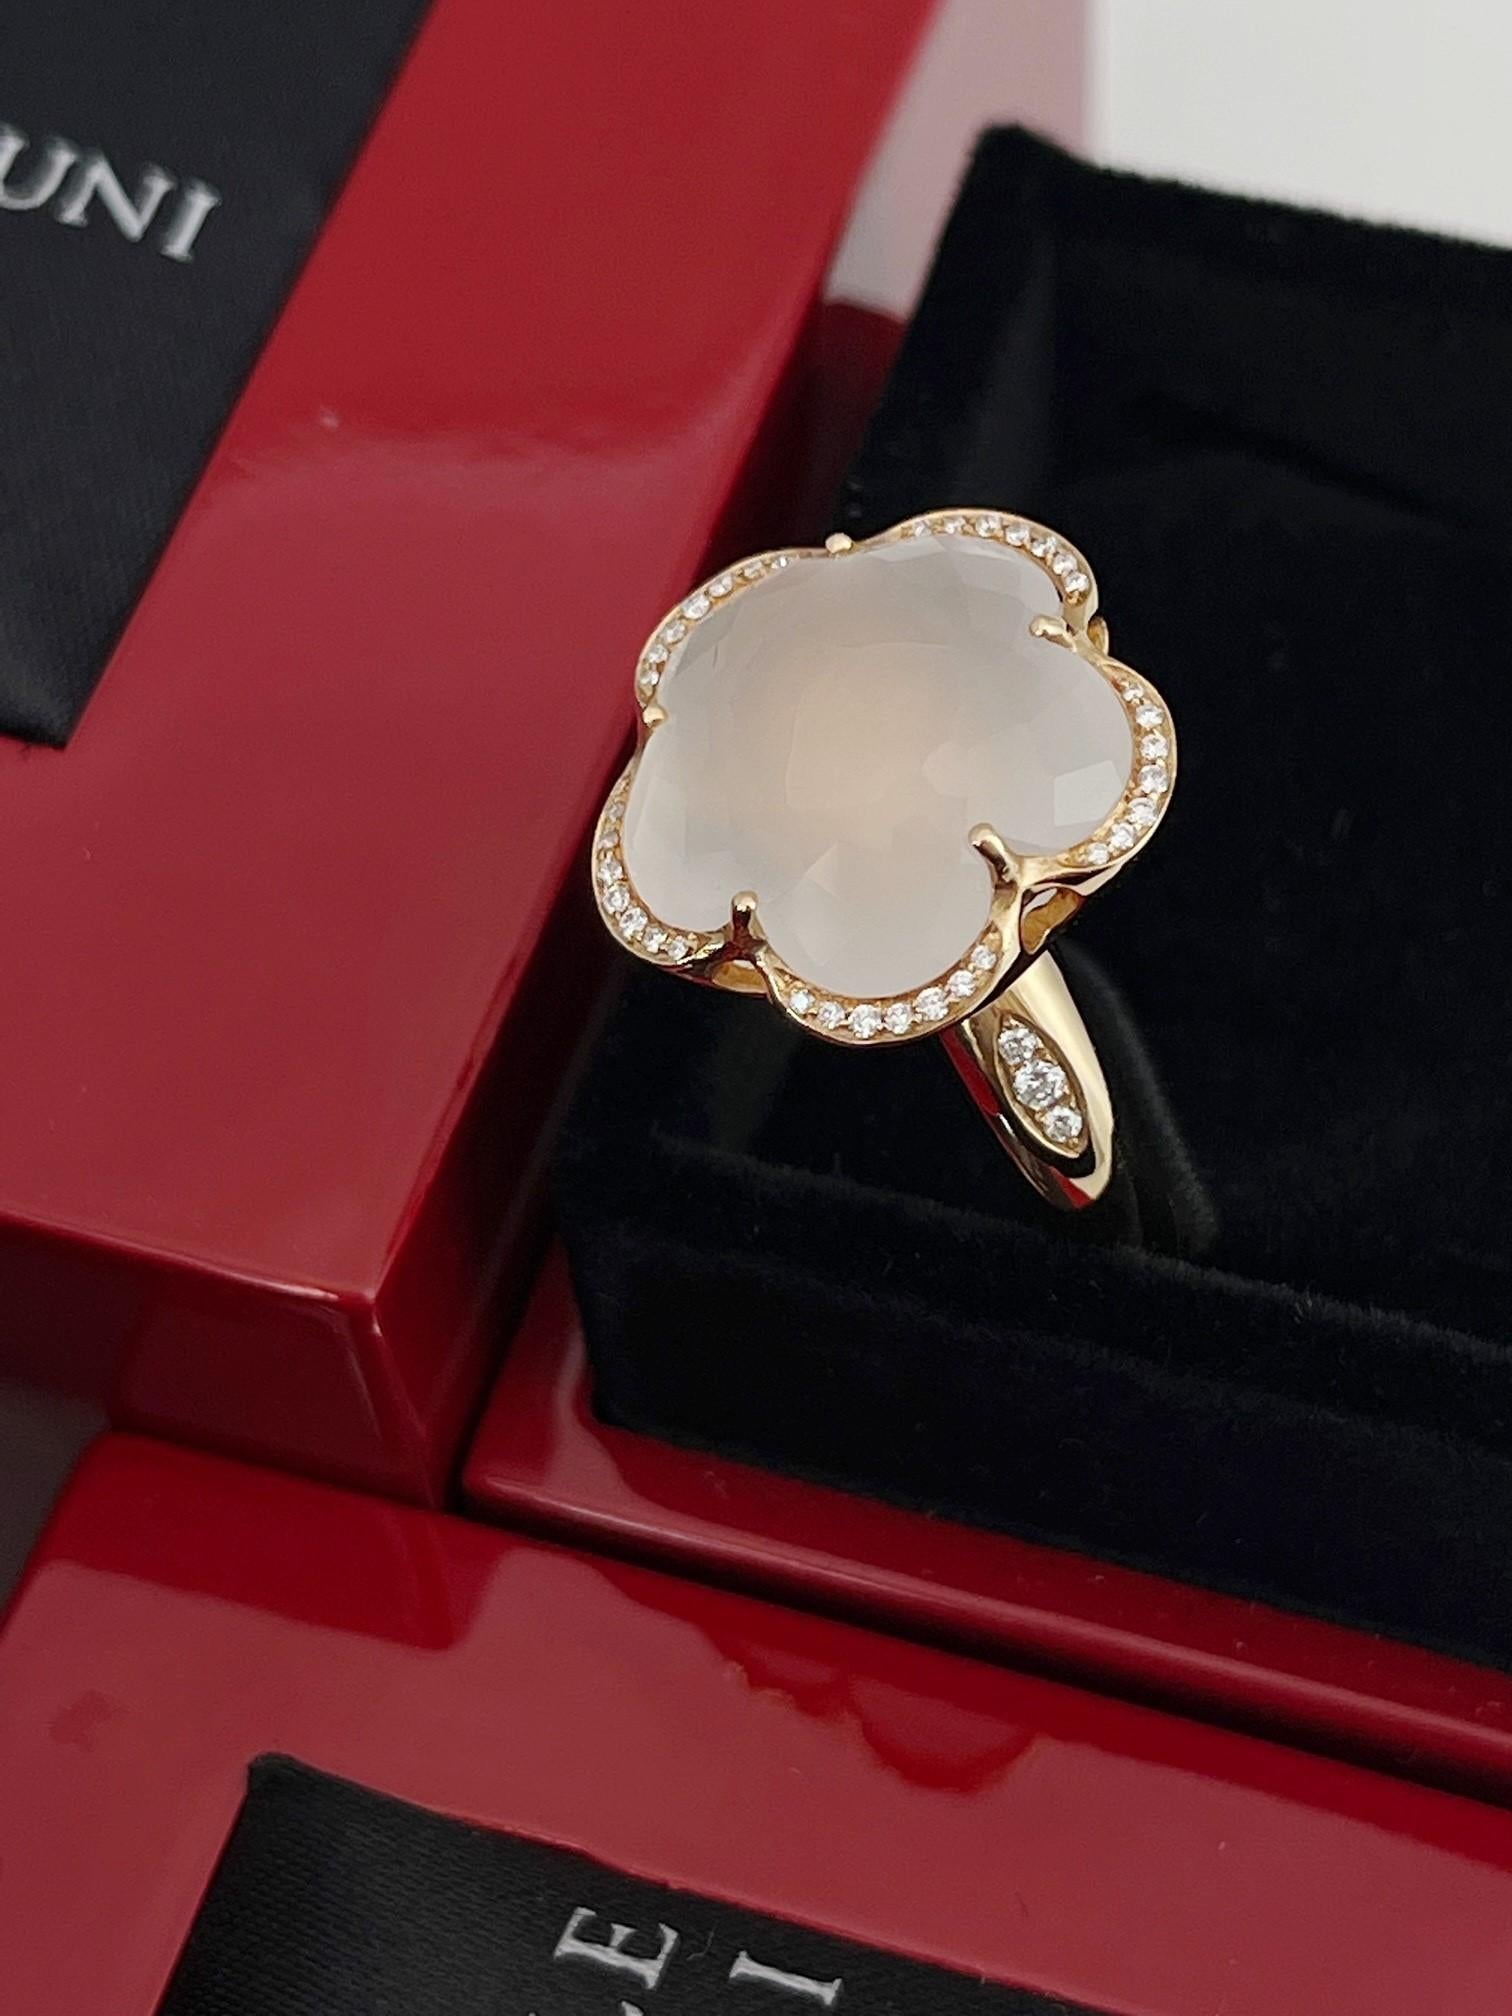 The House of Pasquale Bruni was established in 1968 by the man himself, Pasquale Bruni. Today the brand produces magnificent showpiece and luxury jewelry from the heart of Italy’s Gold district, Valenza.

This beautiful ring from the BON TON